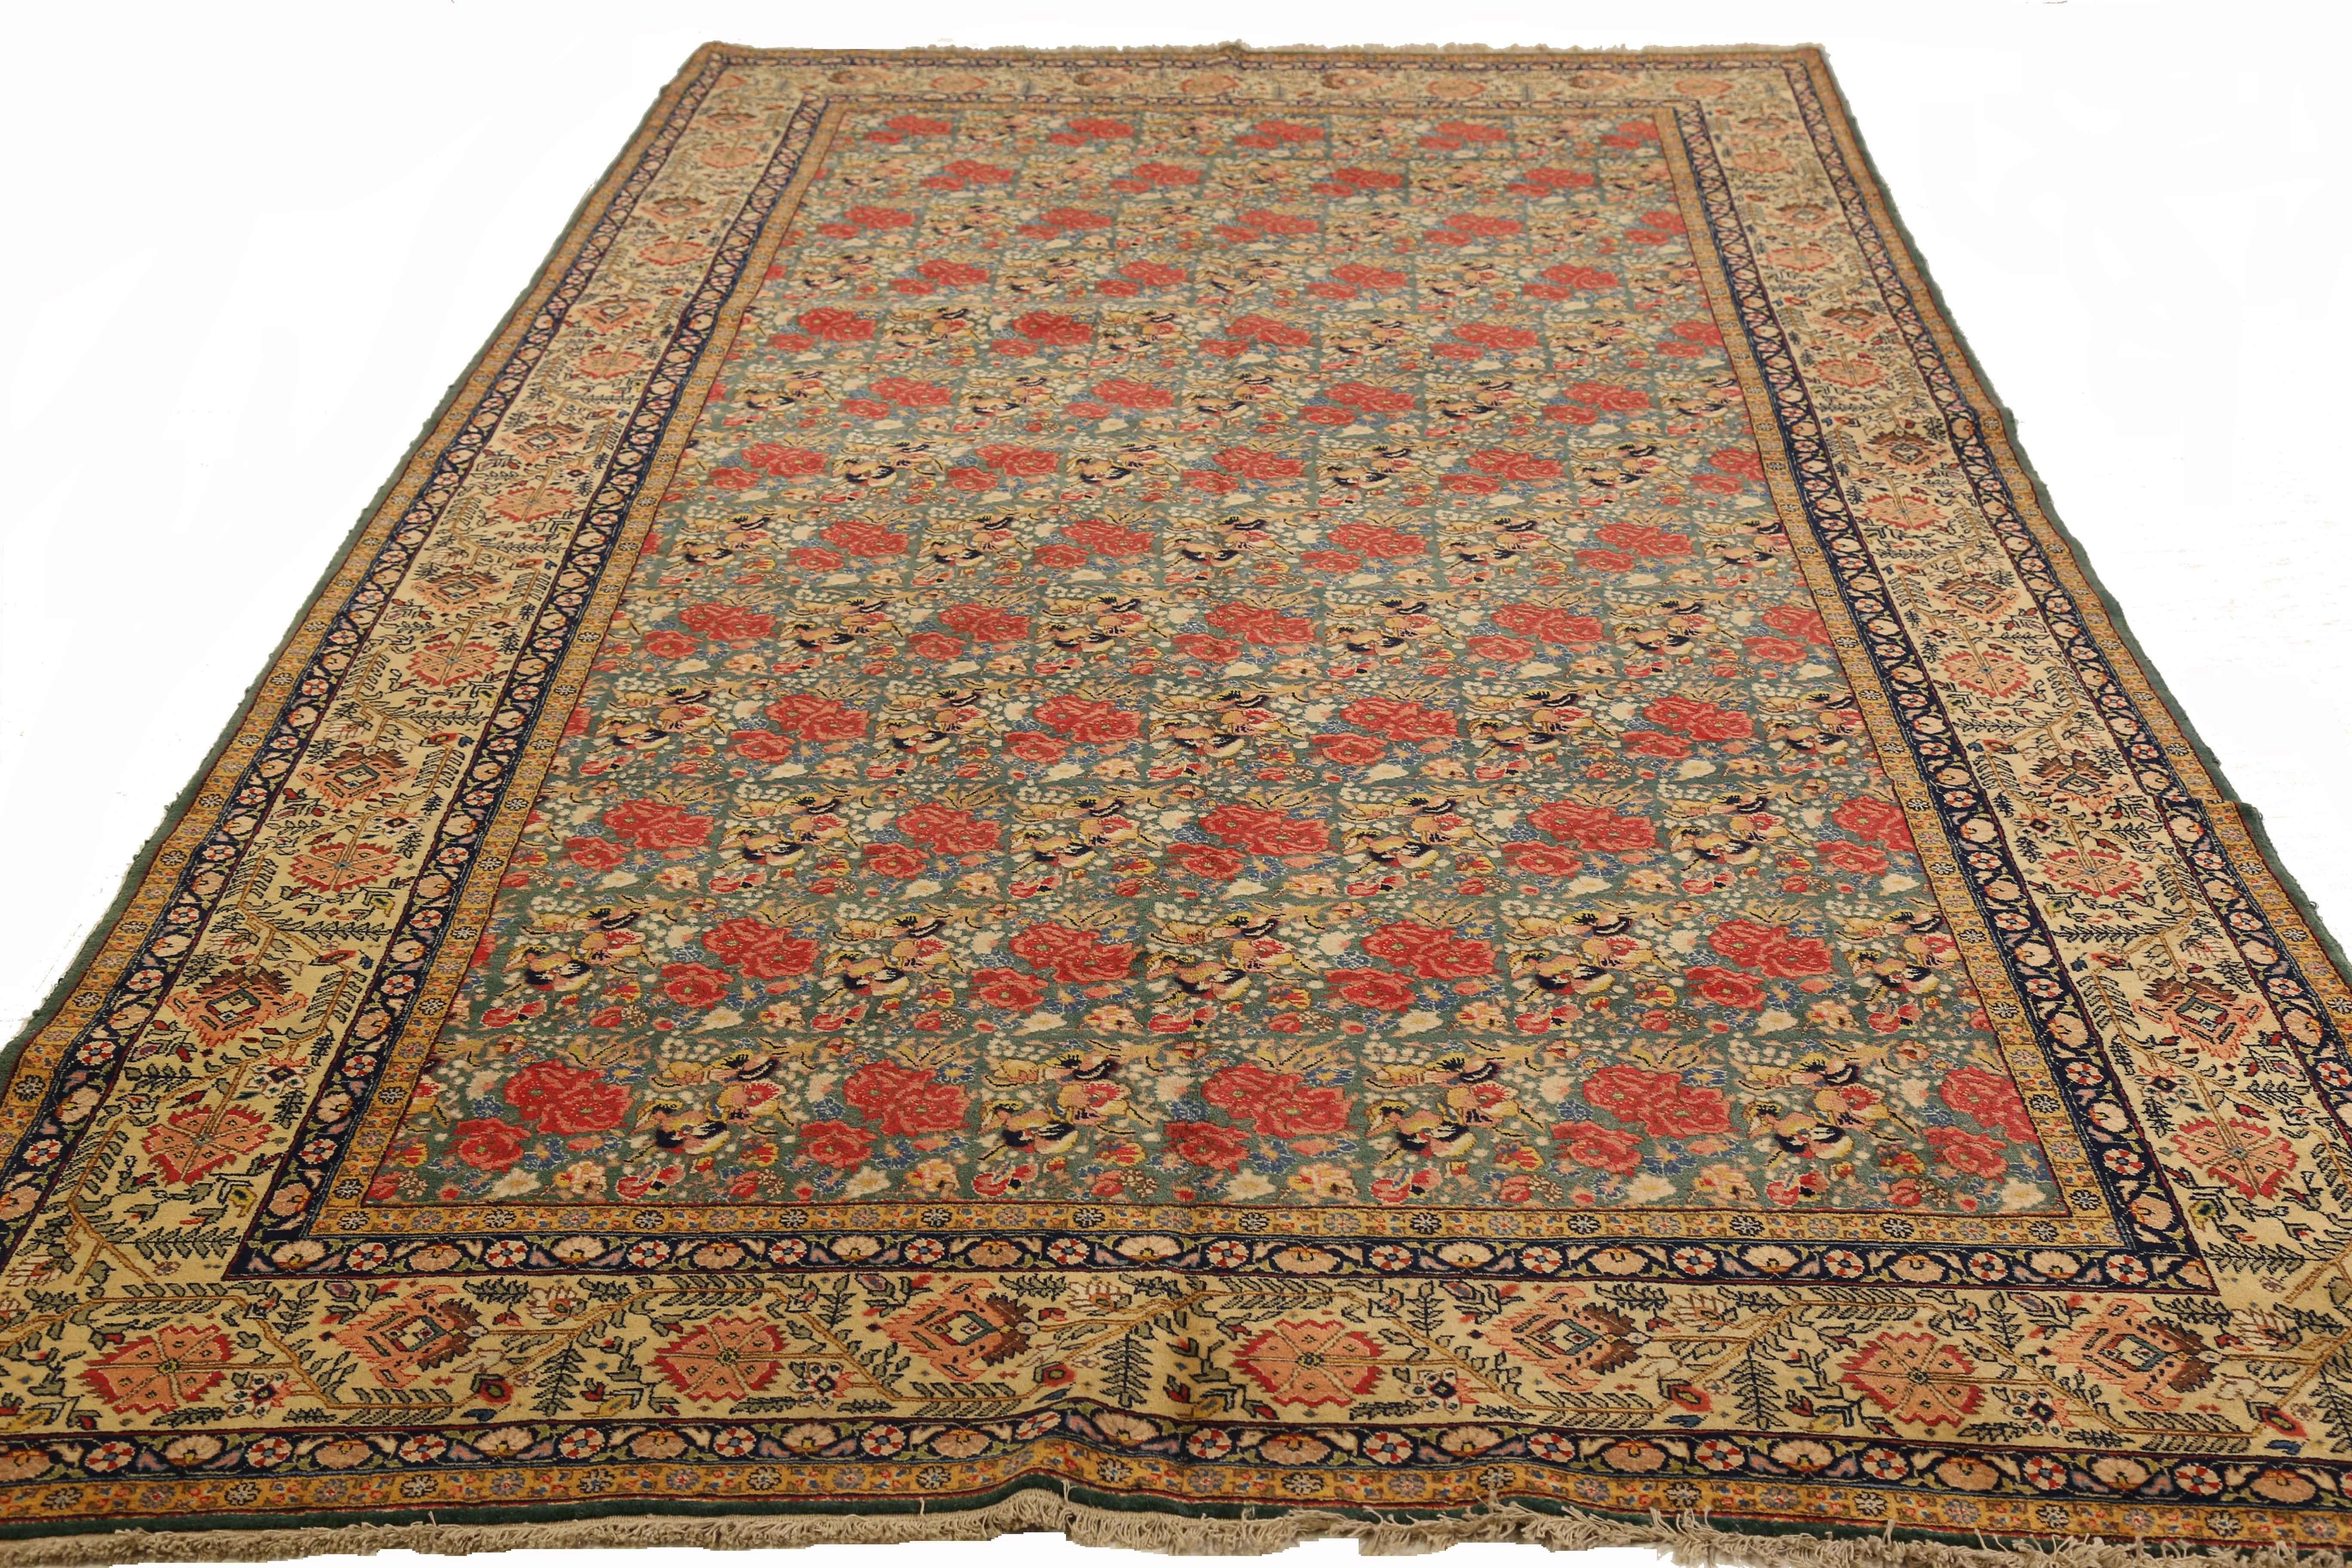 1950s Antique Persian Rug Tabriz Design with Gold and Red Field of Roses Pattern In Excellent Condition For Sale In Dallas, TX